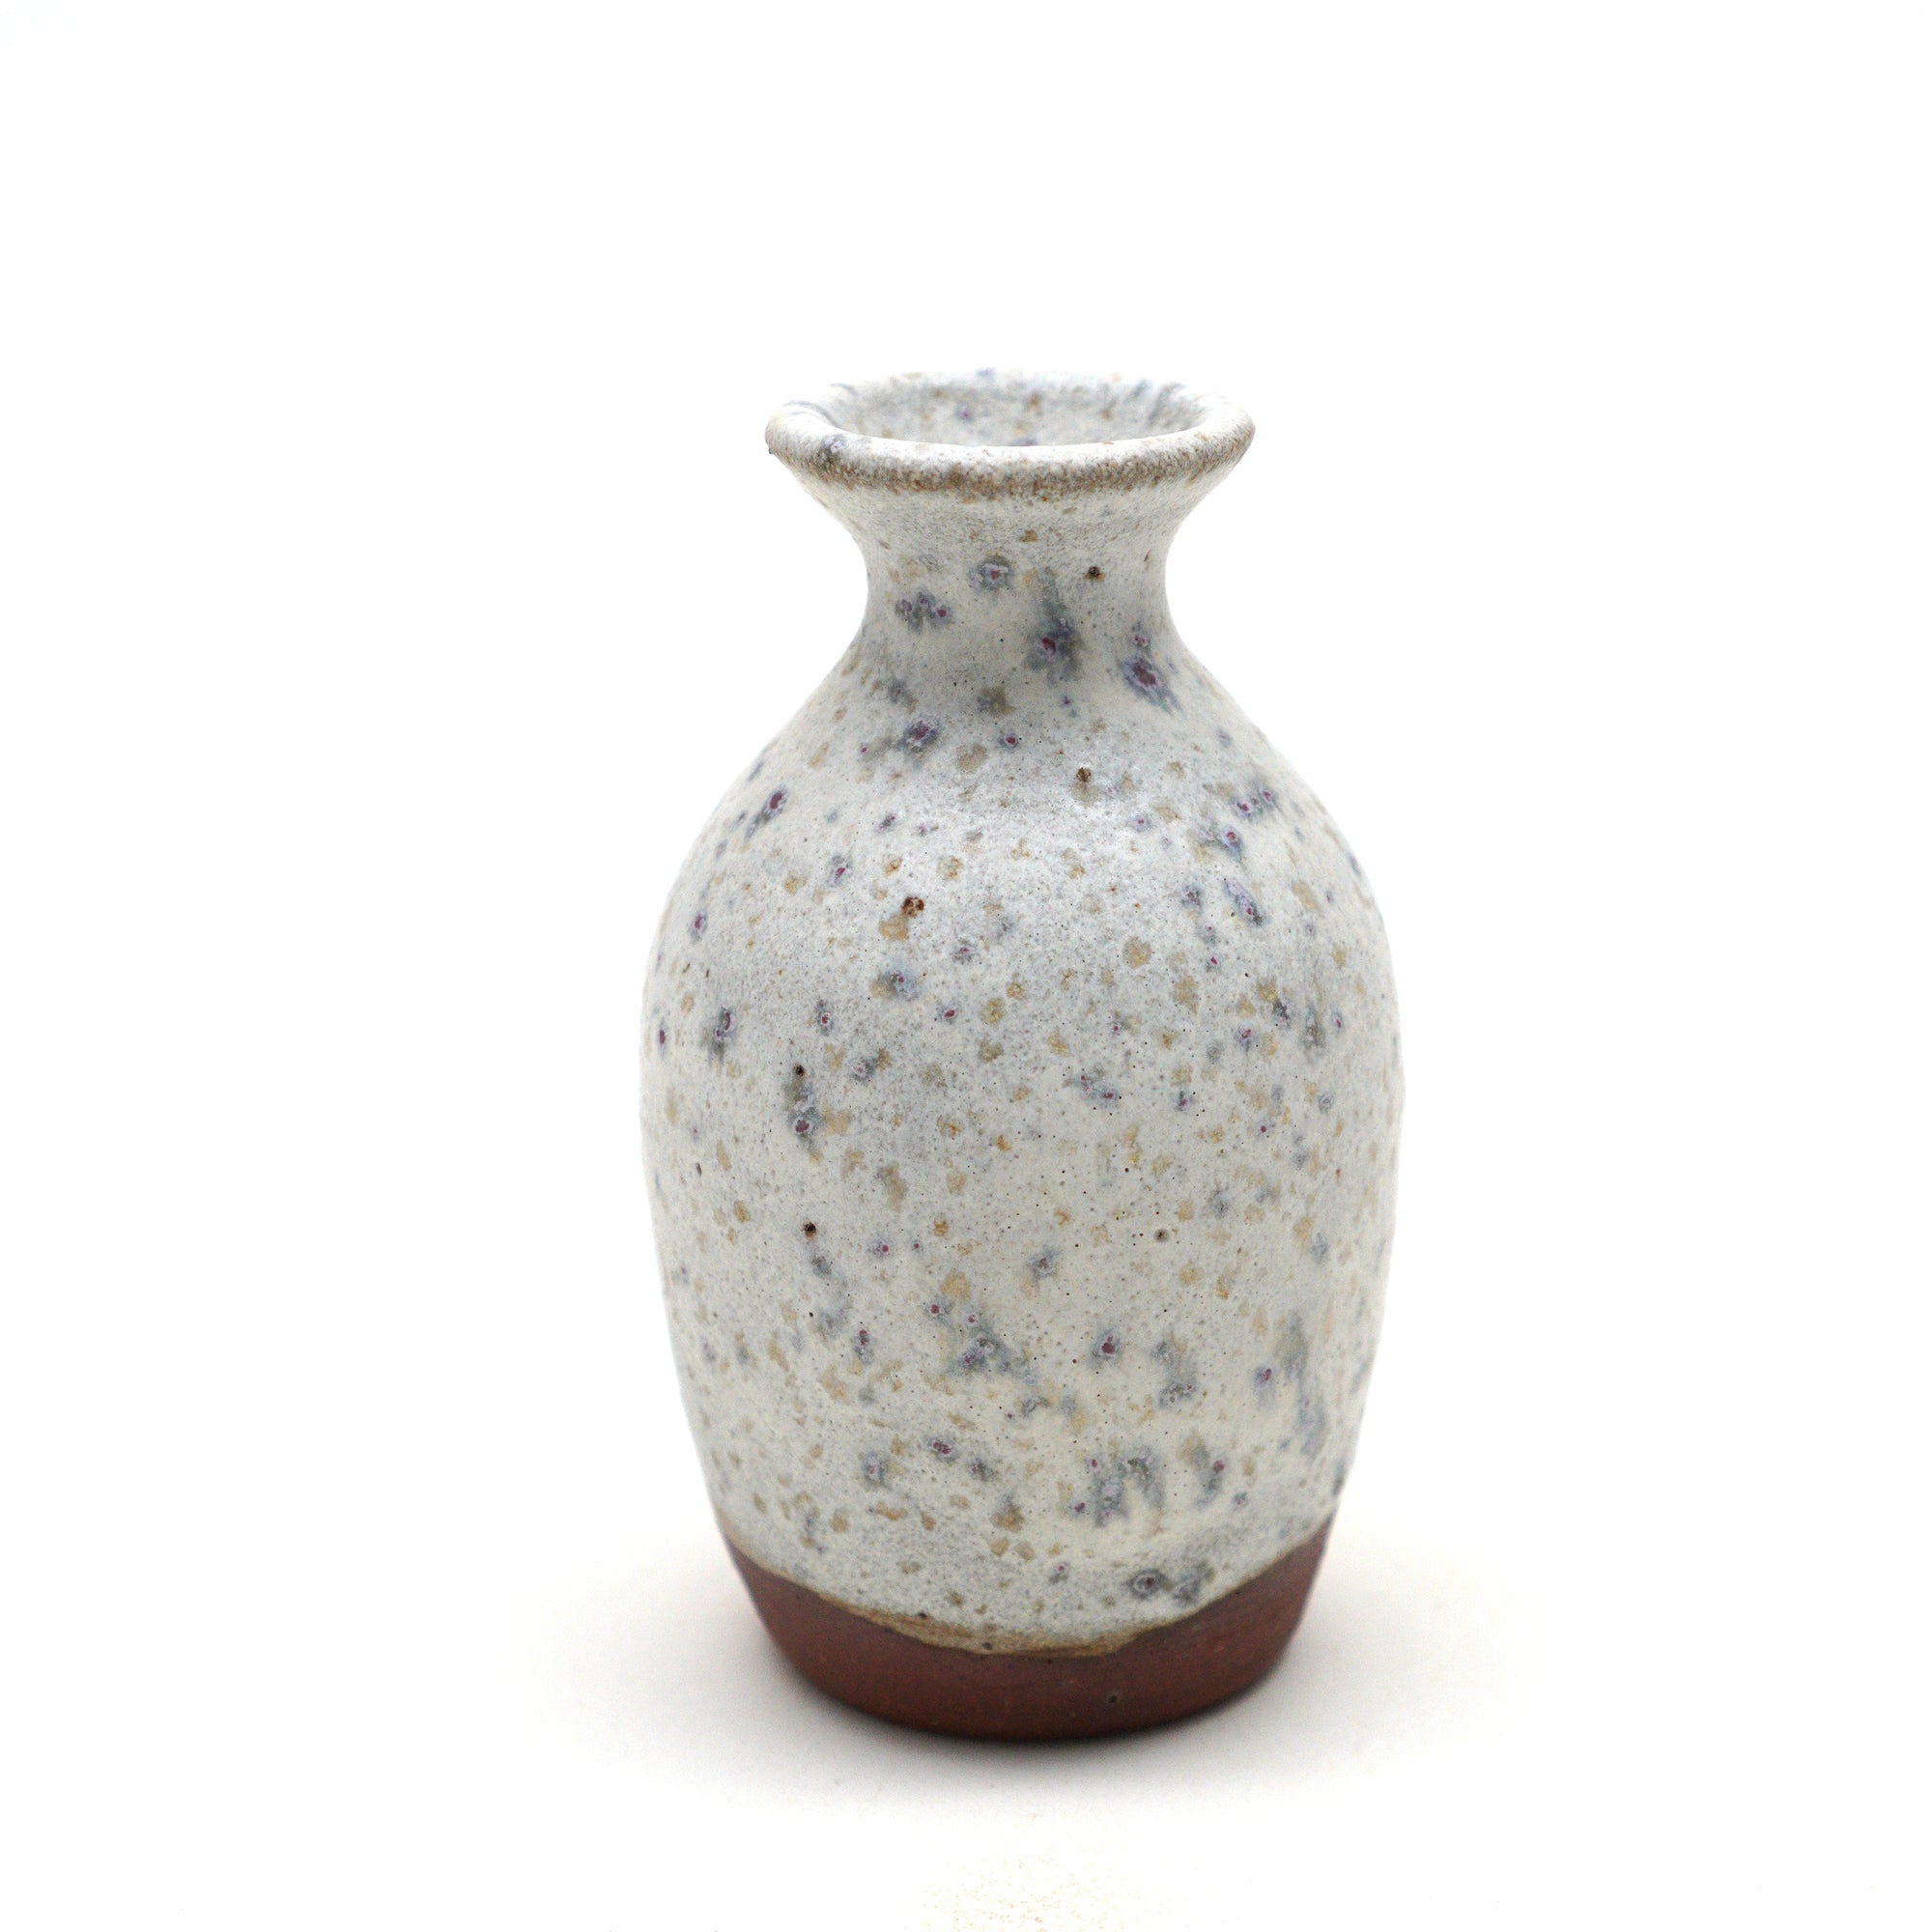 Mini ceramic vase with red clay with a white matte & purple/grey speckled  glaze. Made by Living Large Small on San Juan Island, WA